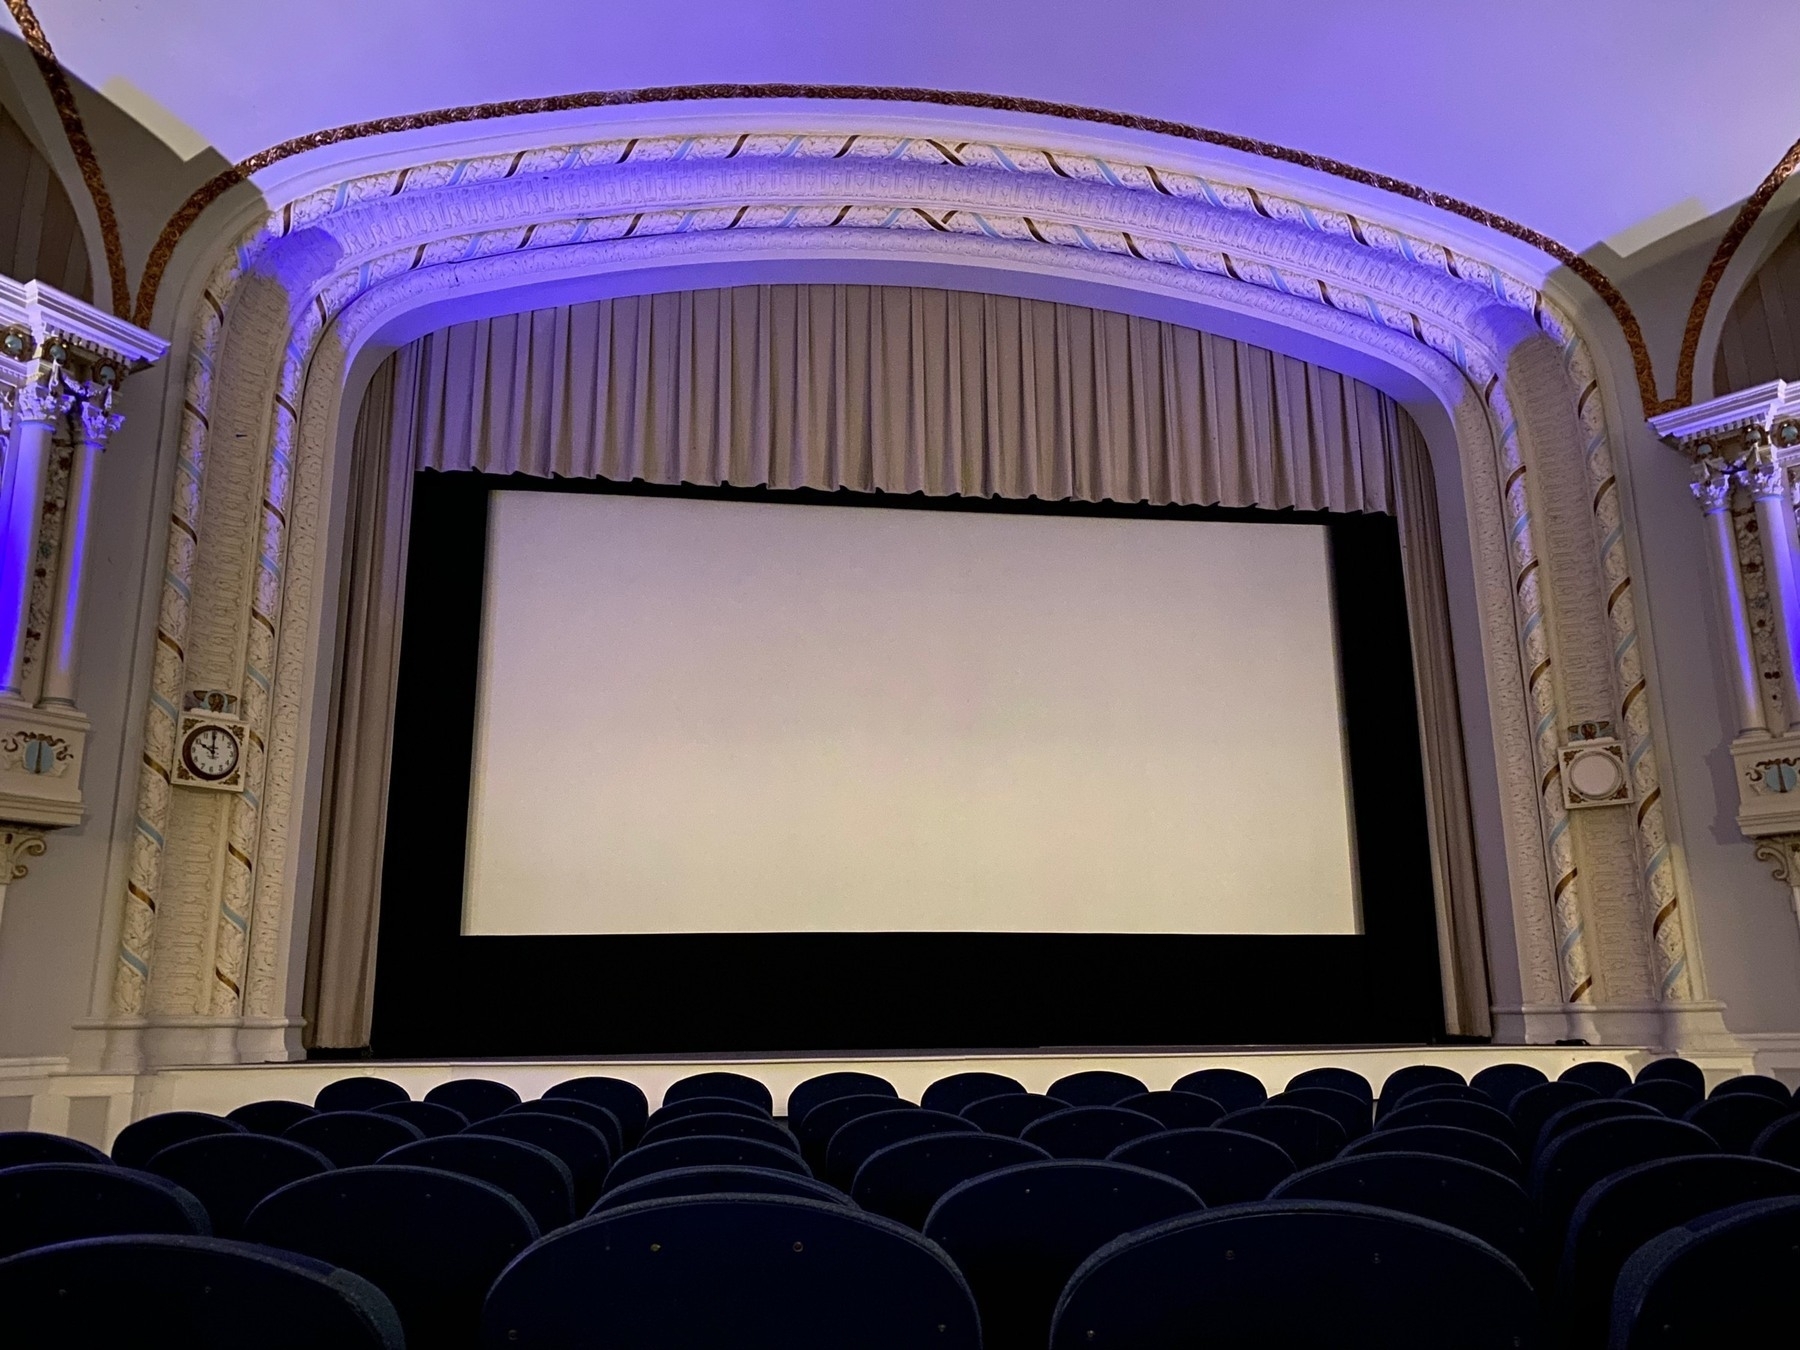 Empty movie theater with a blank white screen and purple side lighting.